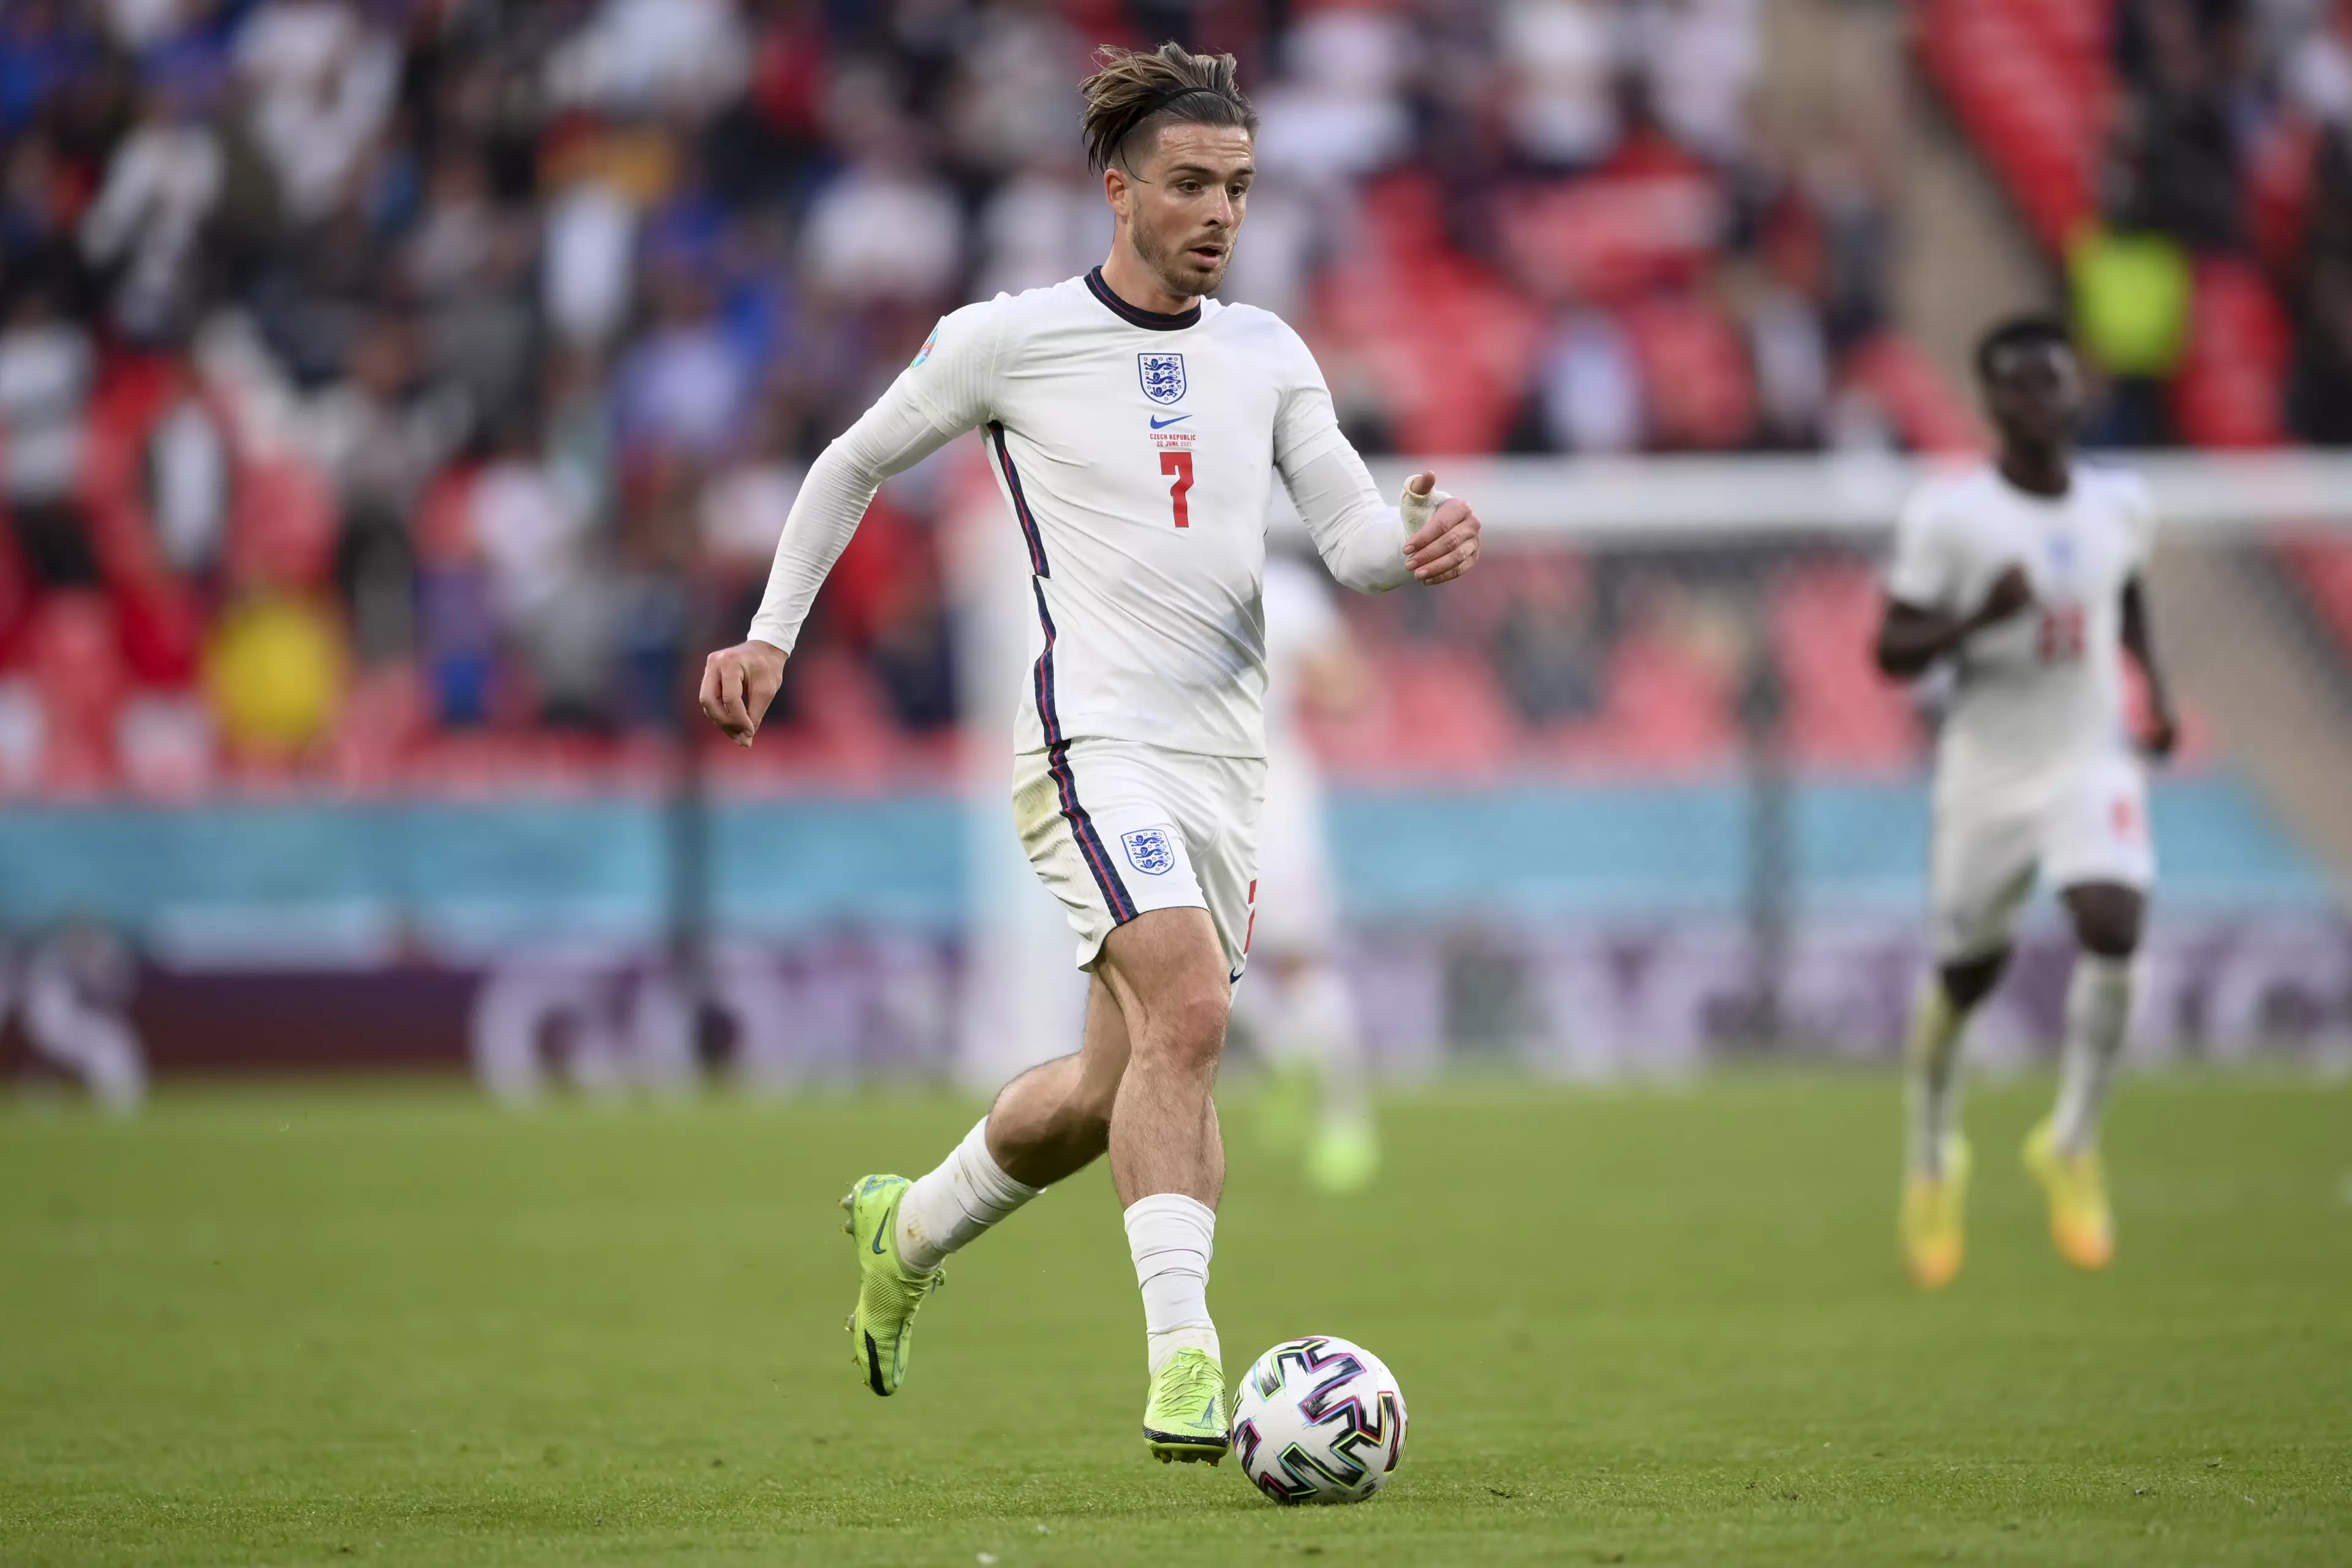 Grealish was a constant threat against Czech Republic. Image: PA Images